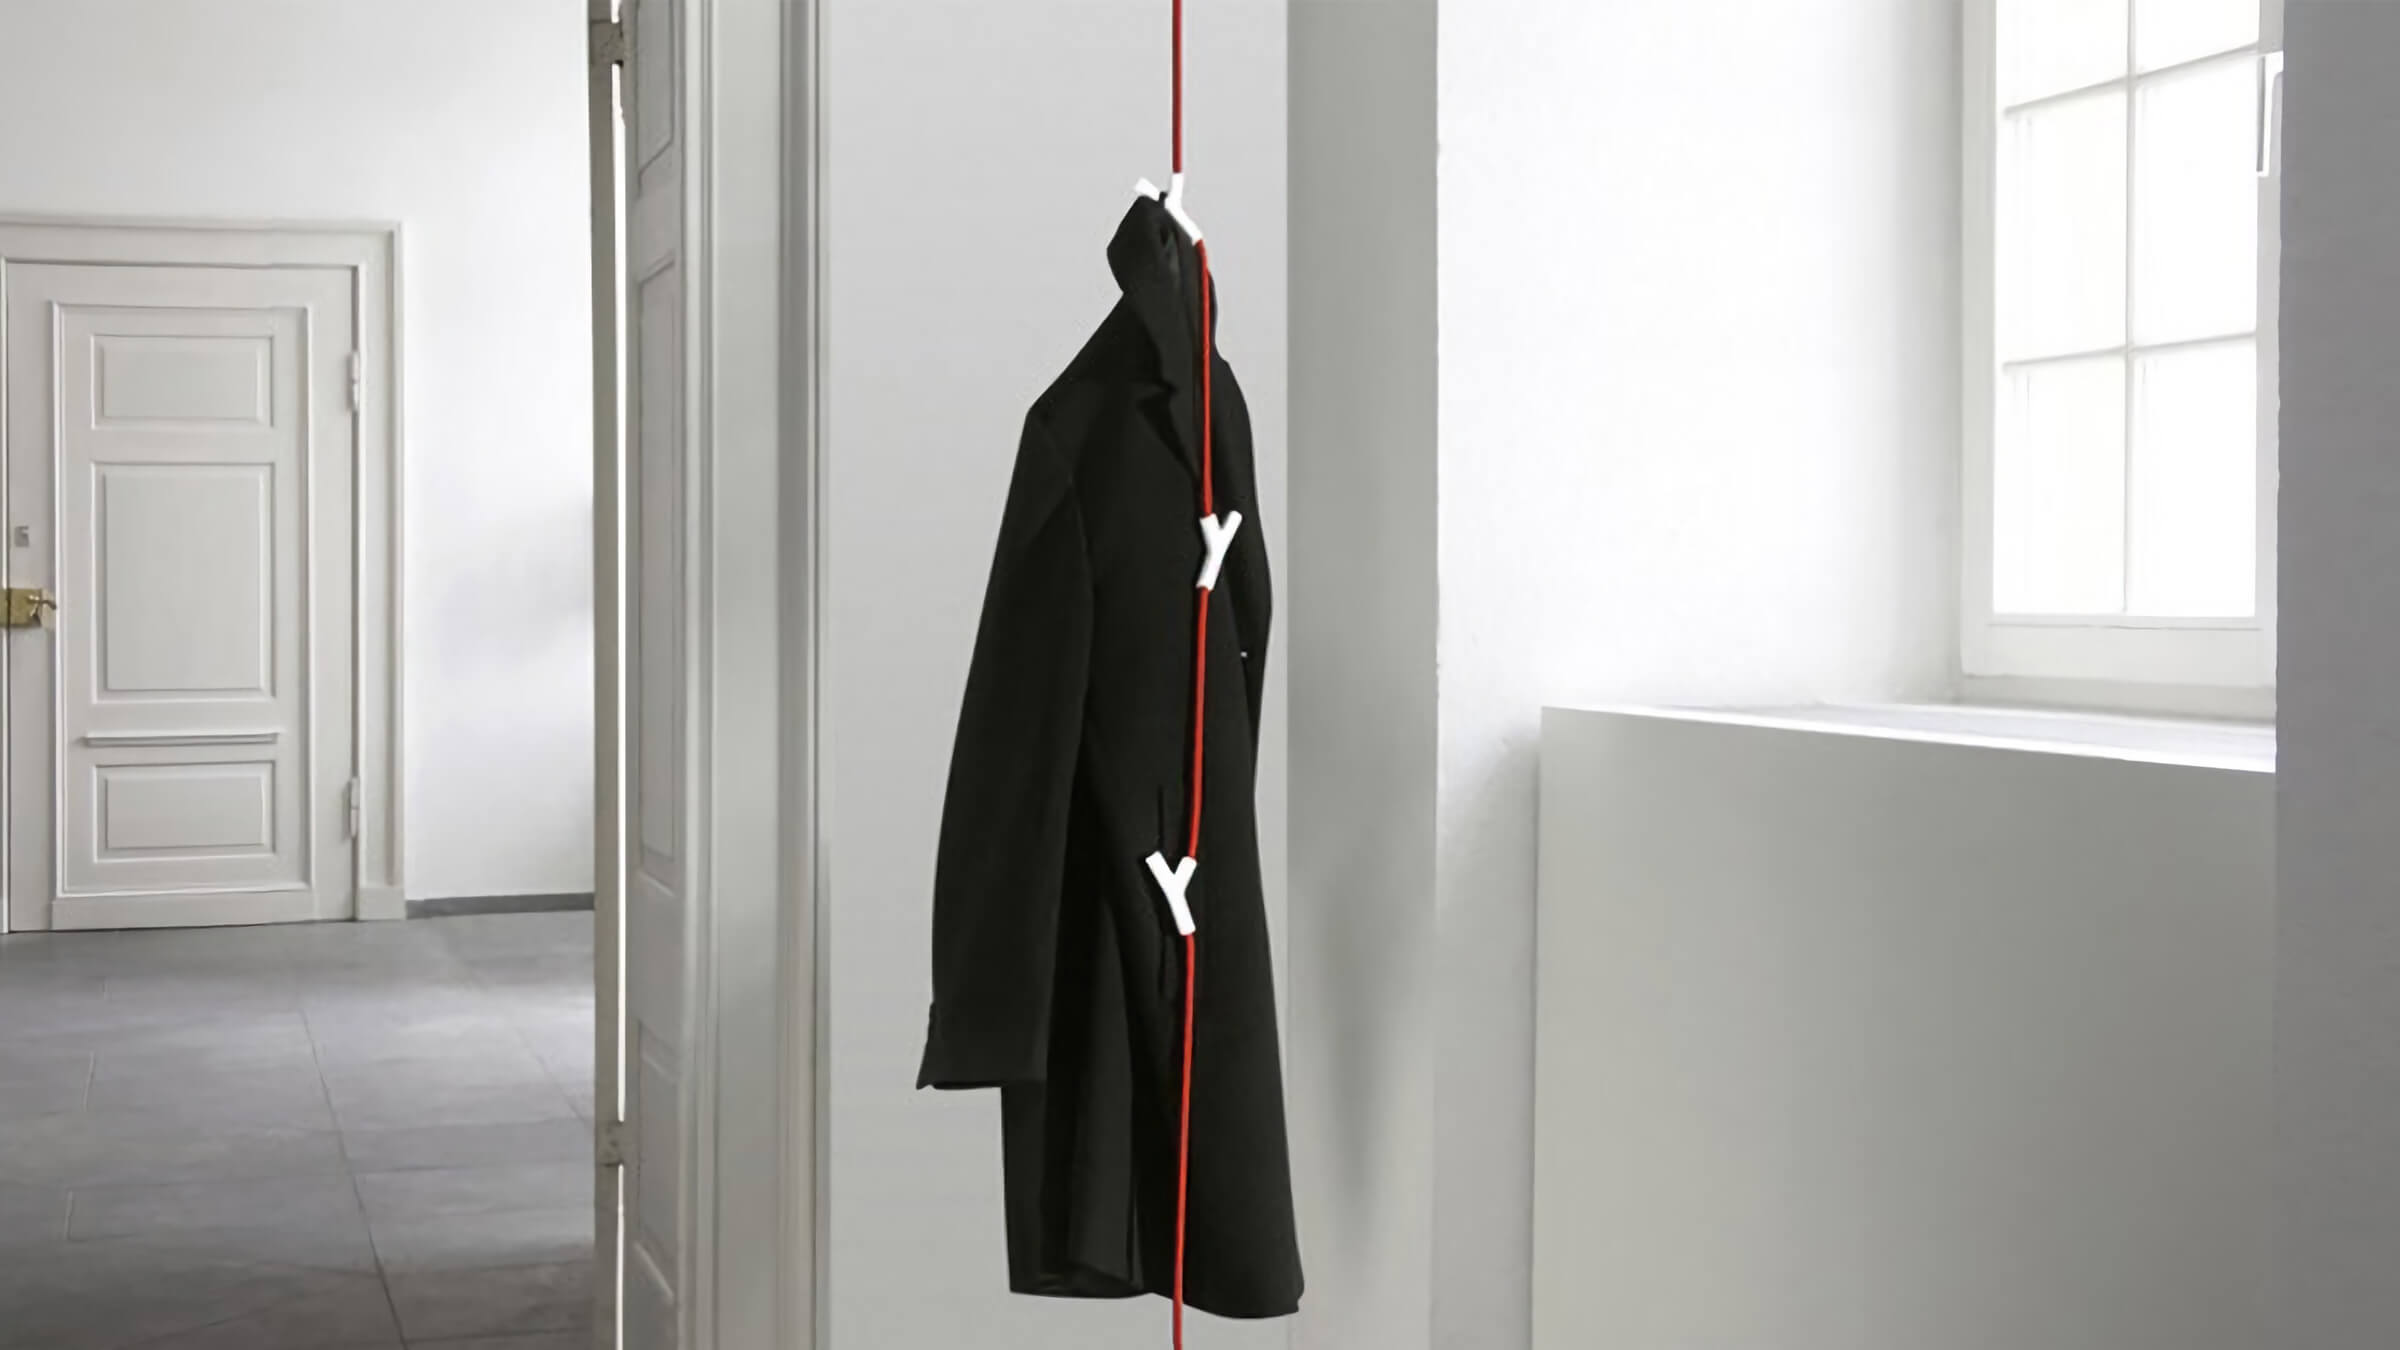 Wardrope Hanging Coat Rack by Wildgruber and Stofer for Authentics